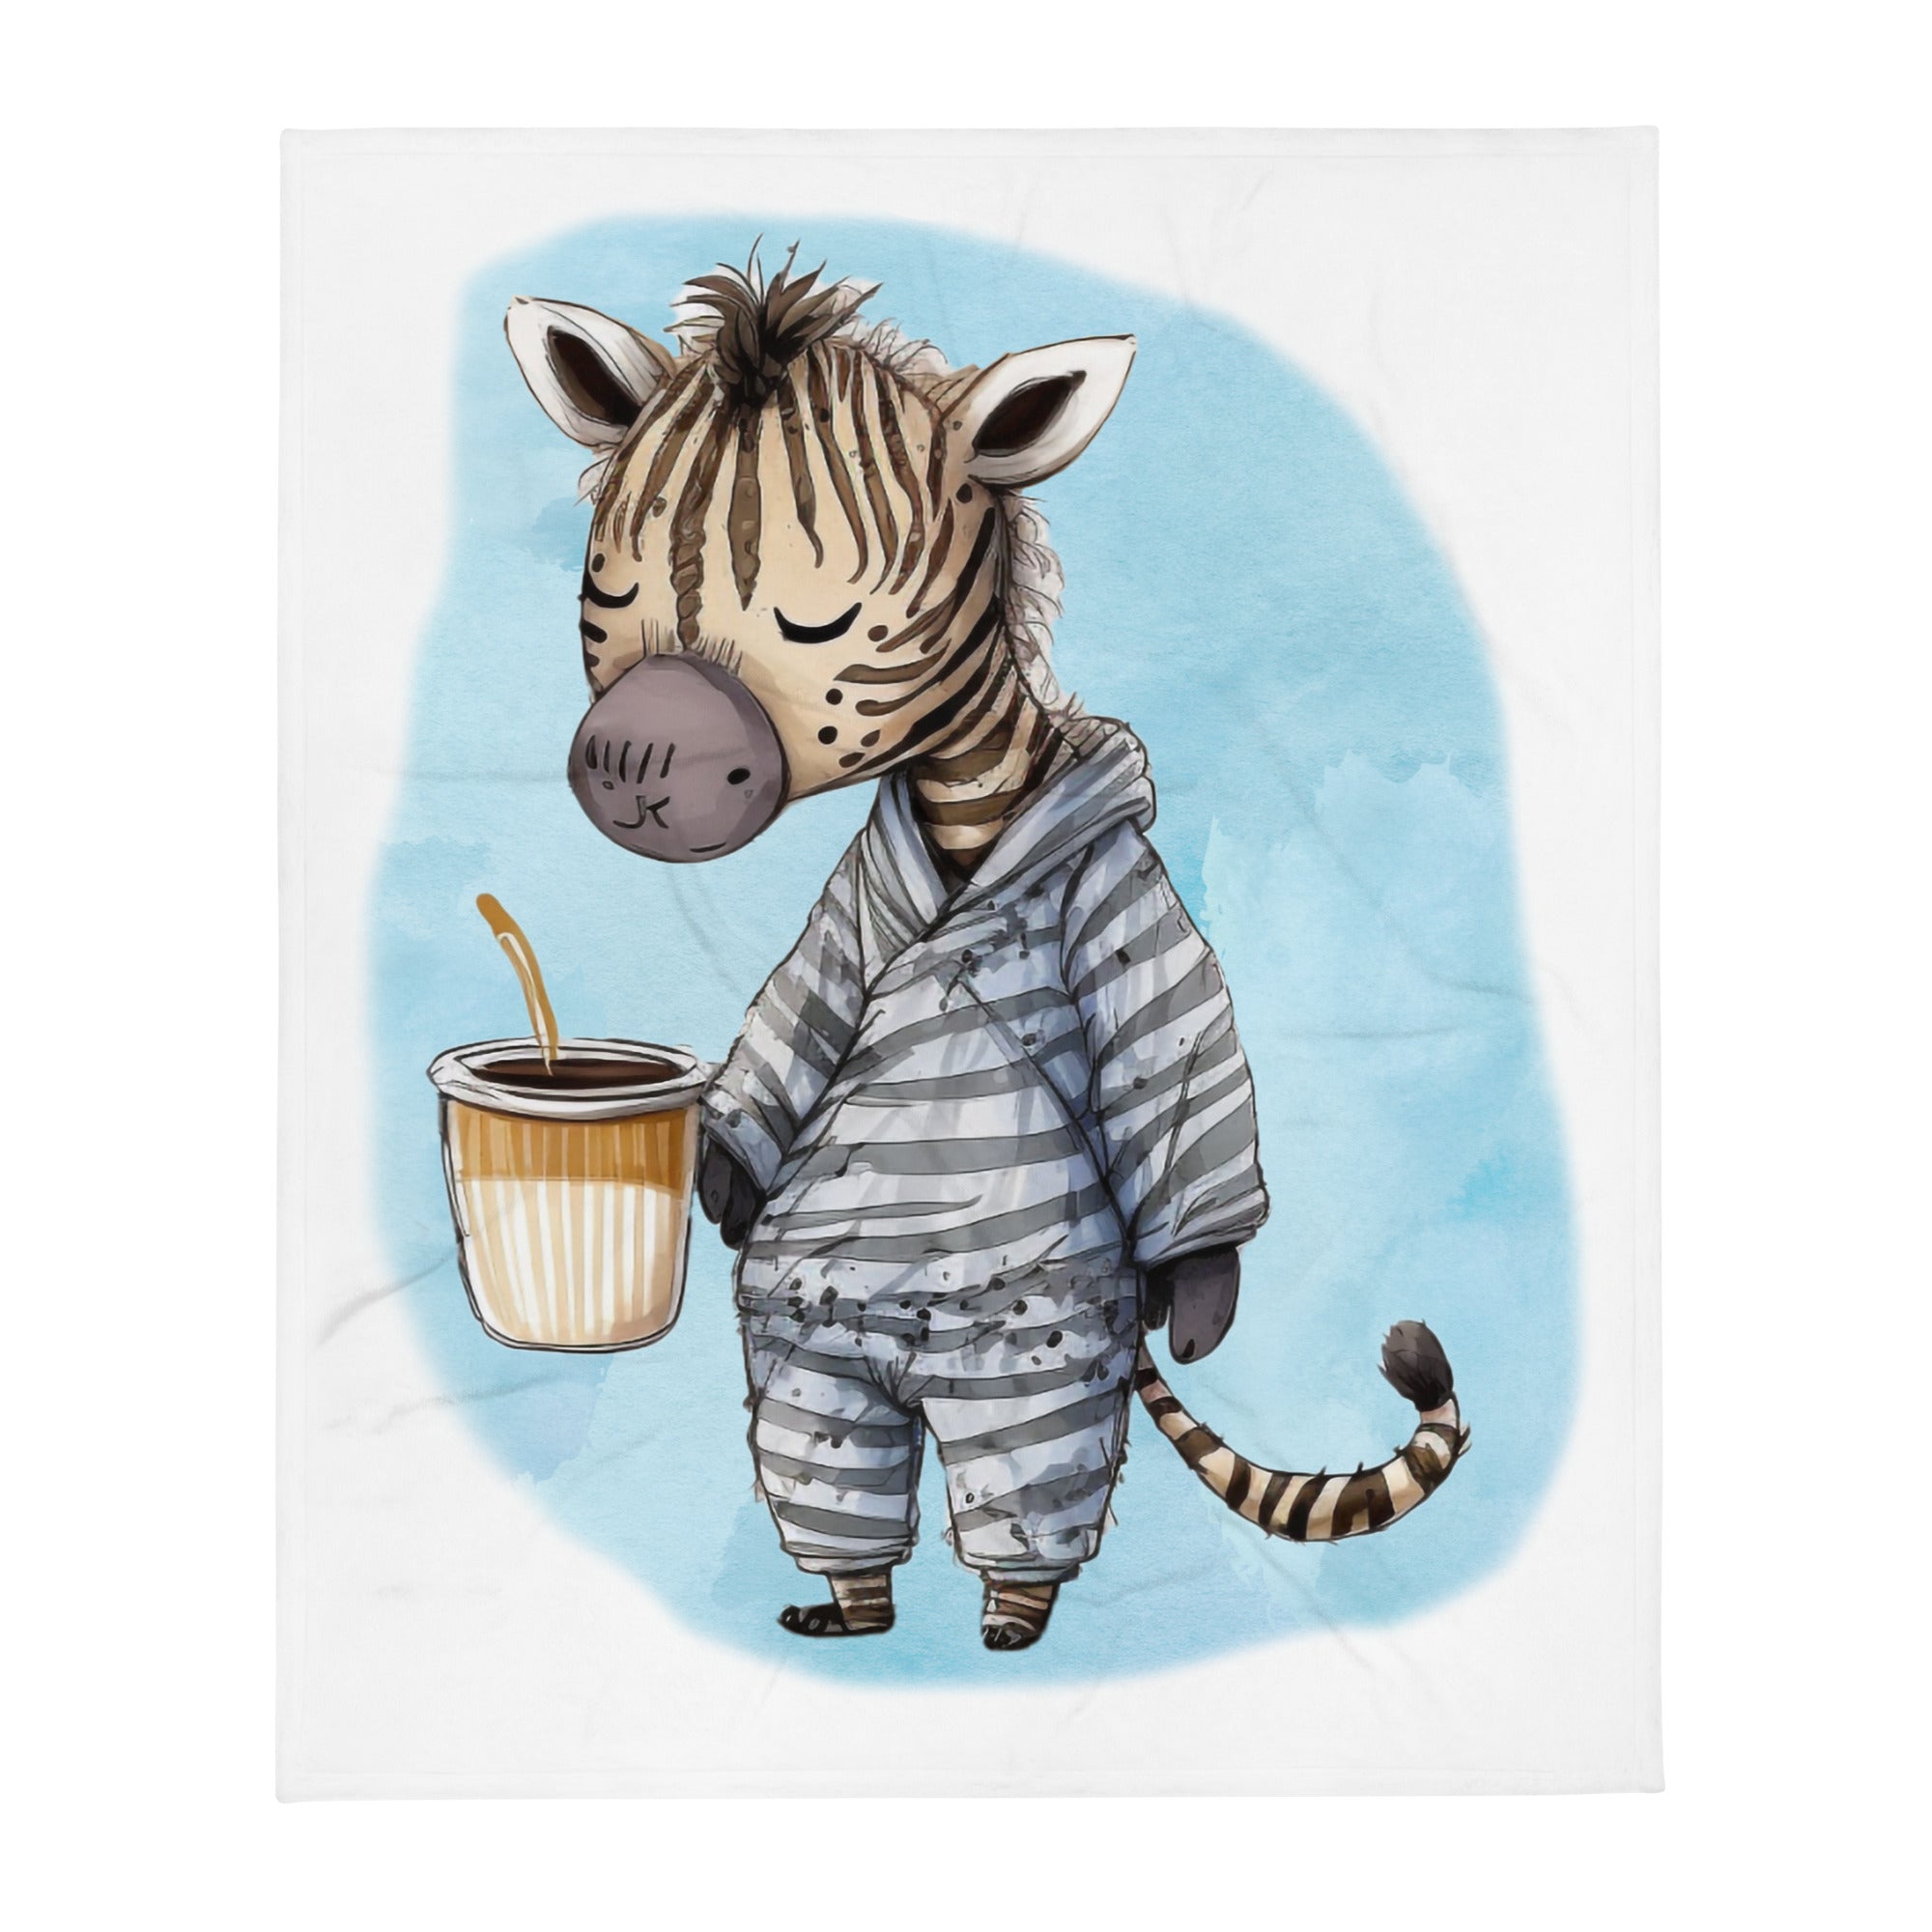 Sleepy Zebra 100% Polyester Soft Silk Touch Fabric Throw Blanket - Cozy, Durable and Adorable